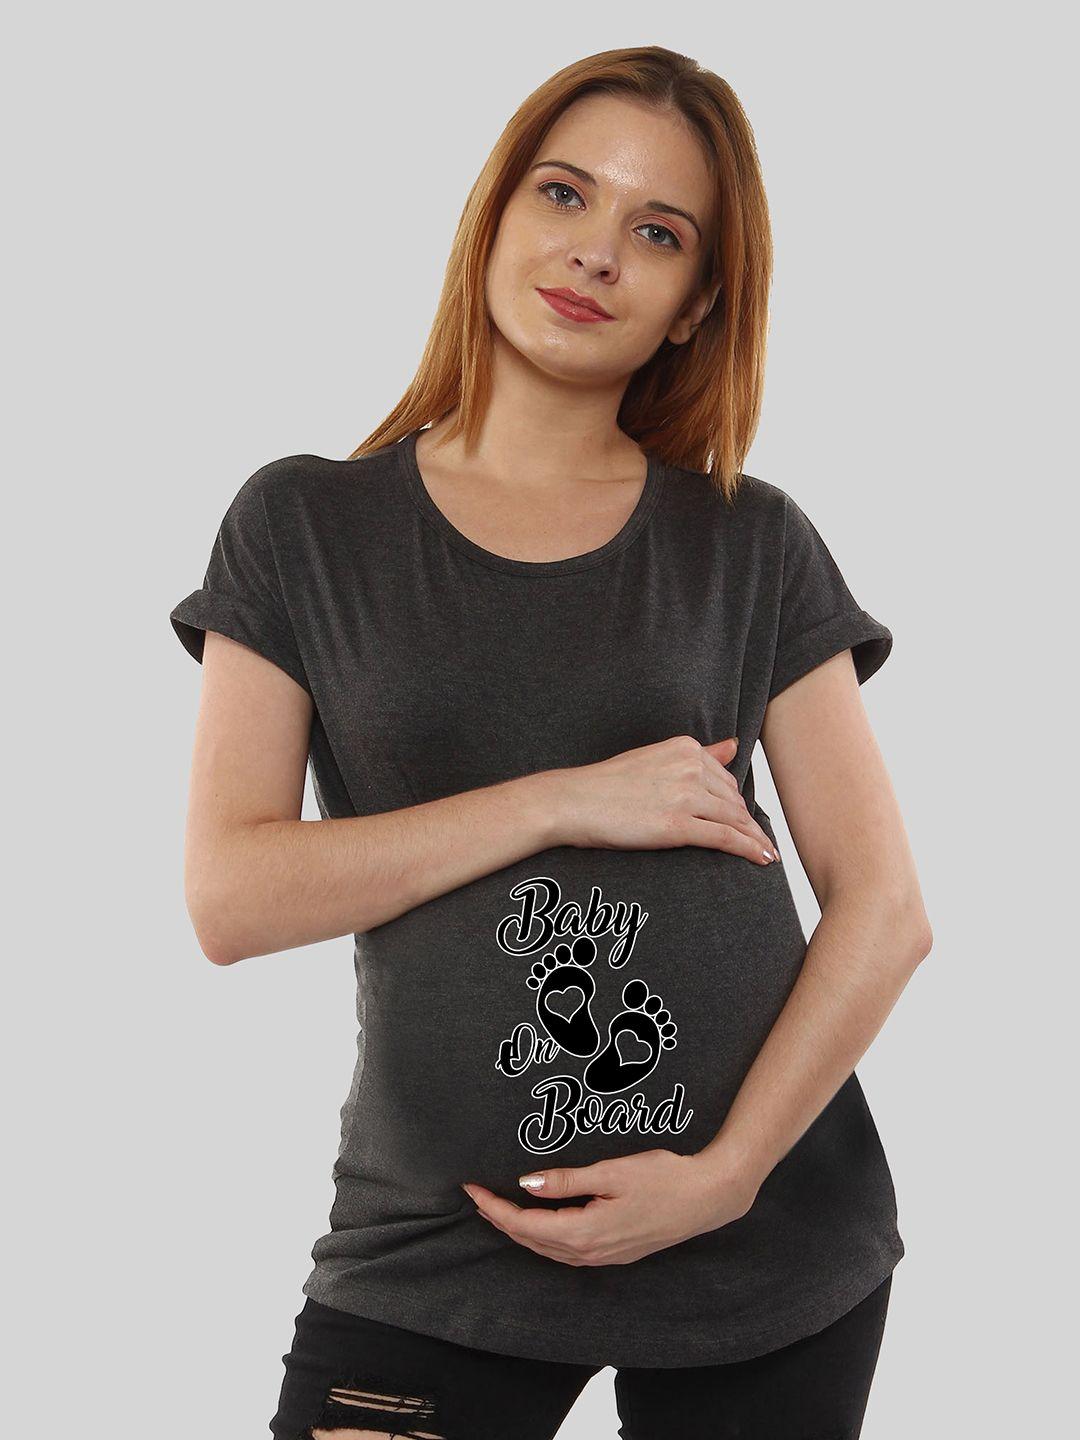 sillyboom graphic printed cotton maternity feeding t-shirt